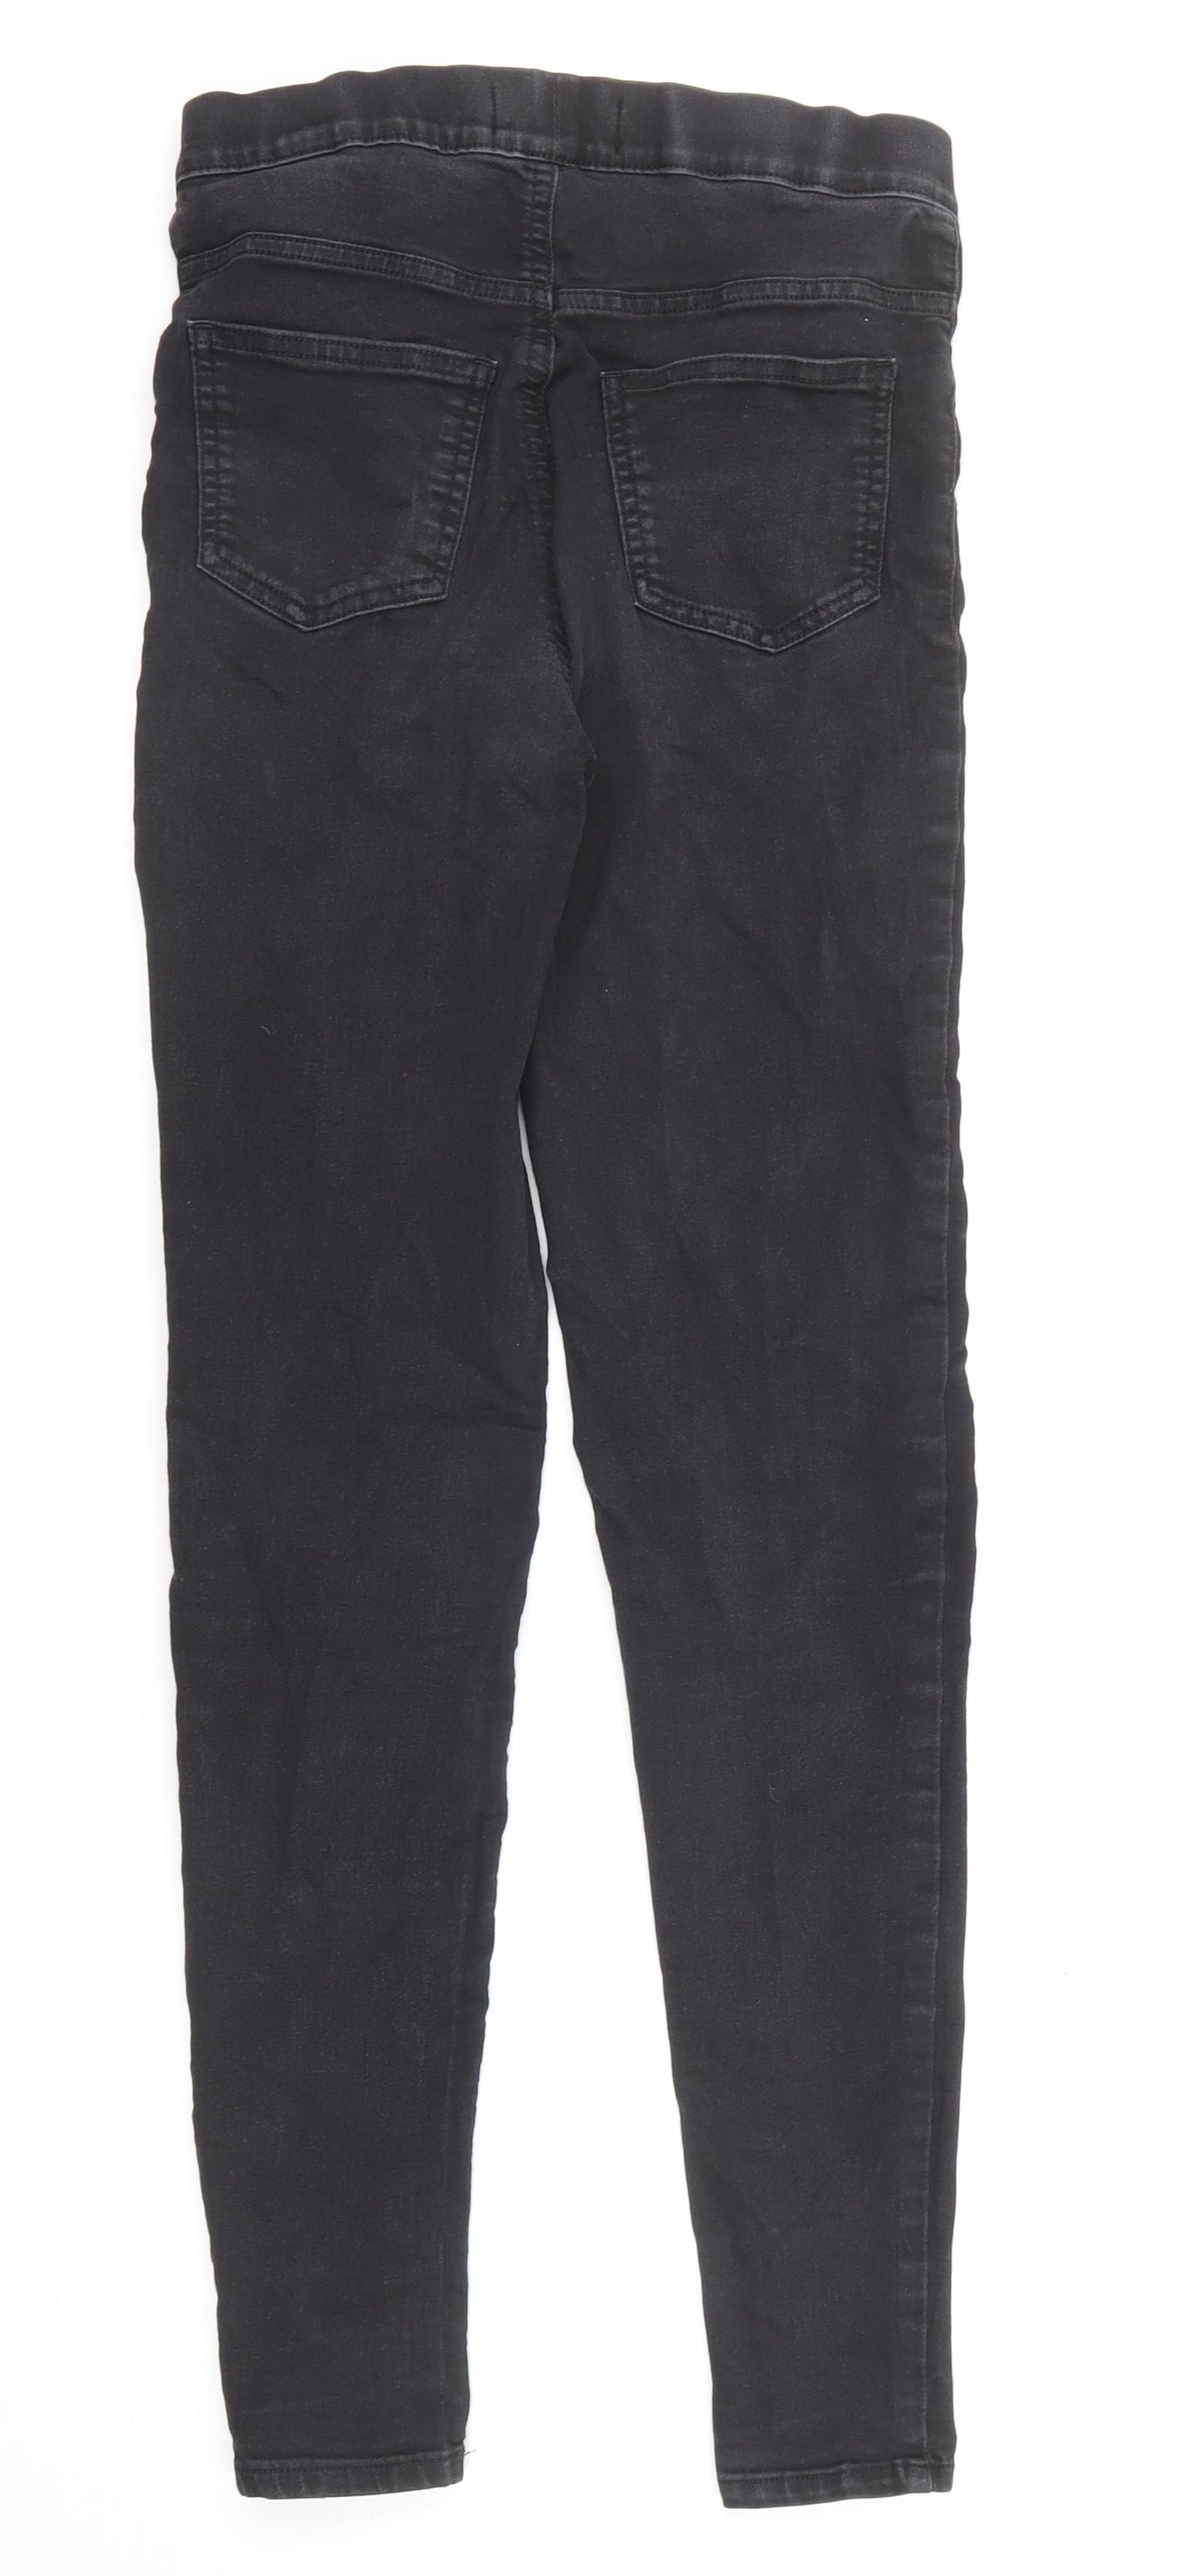 Marks and Spencer Womens Black Cotton Jegging Jeans Size 8 L29 in Regular